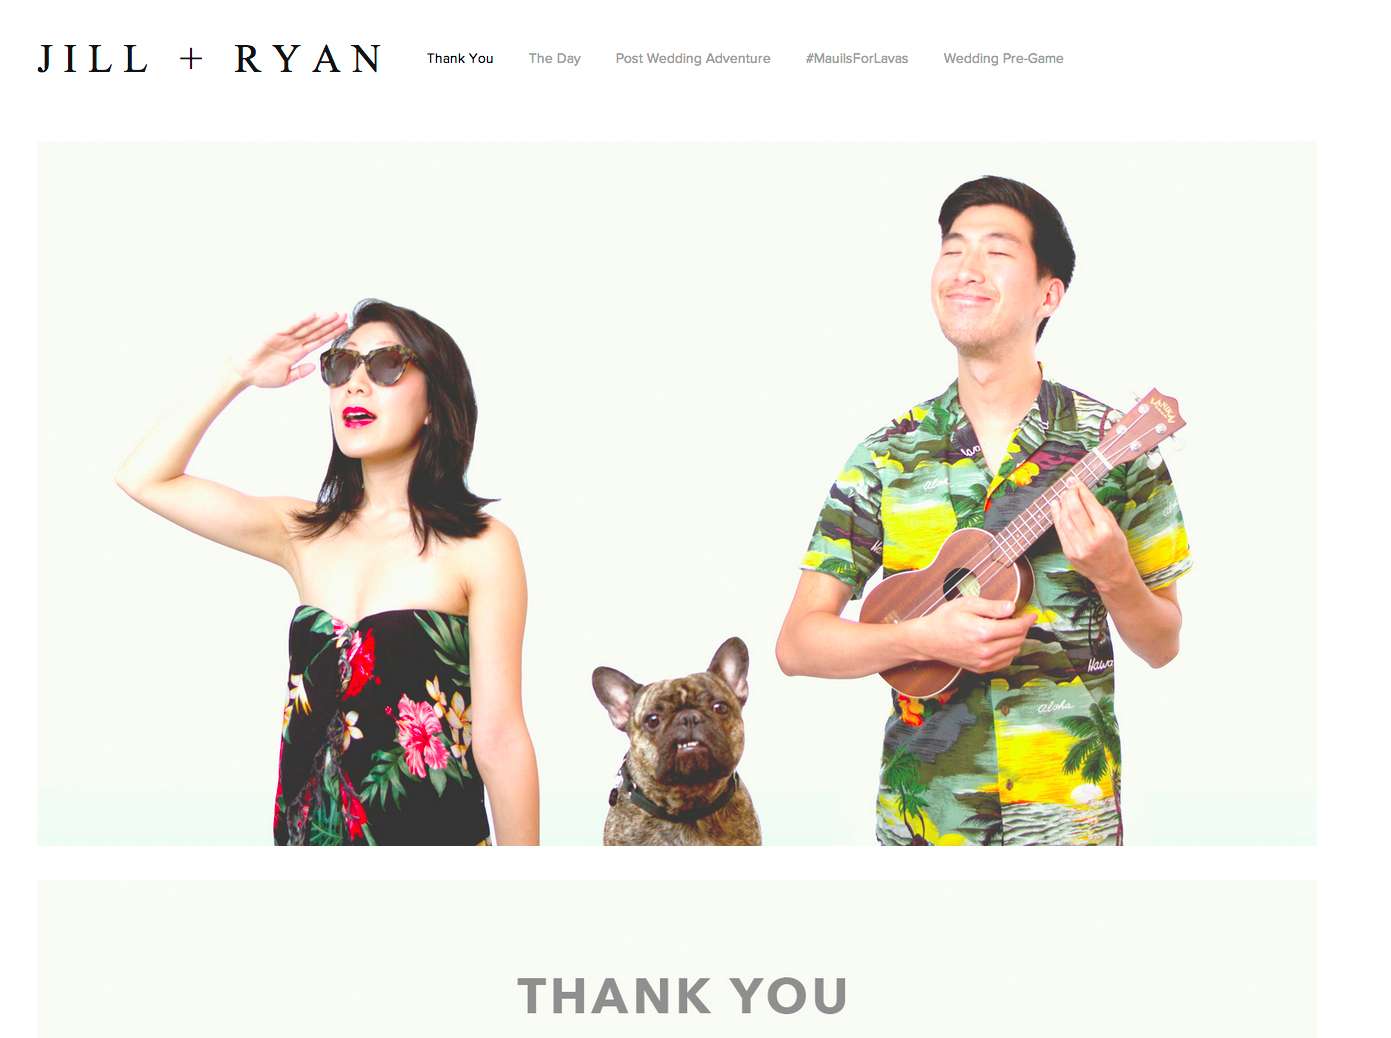 Start Your Own 'Wed-Site' with Squarespace